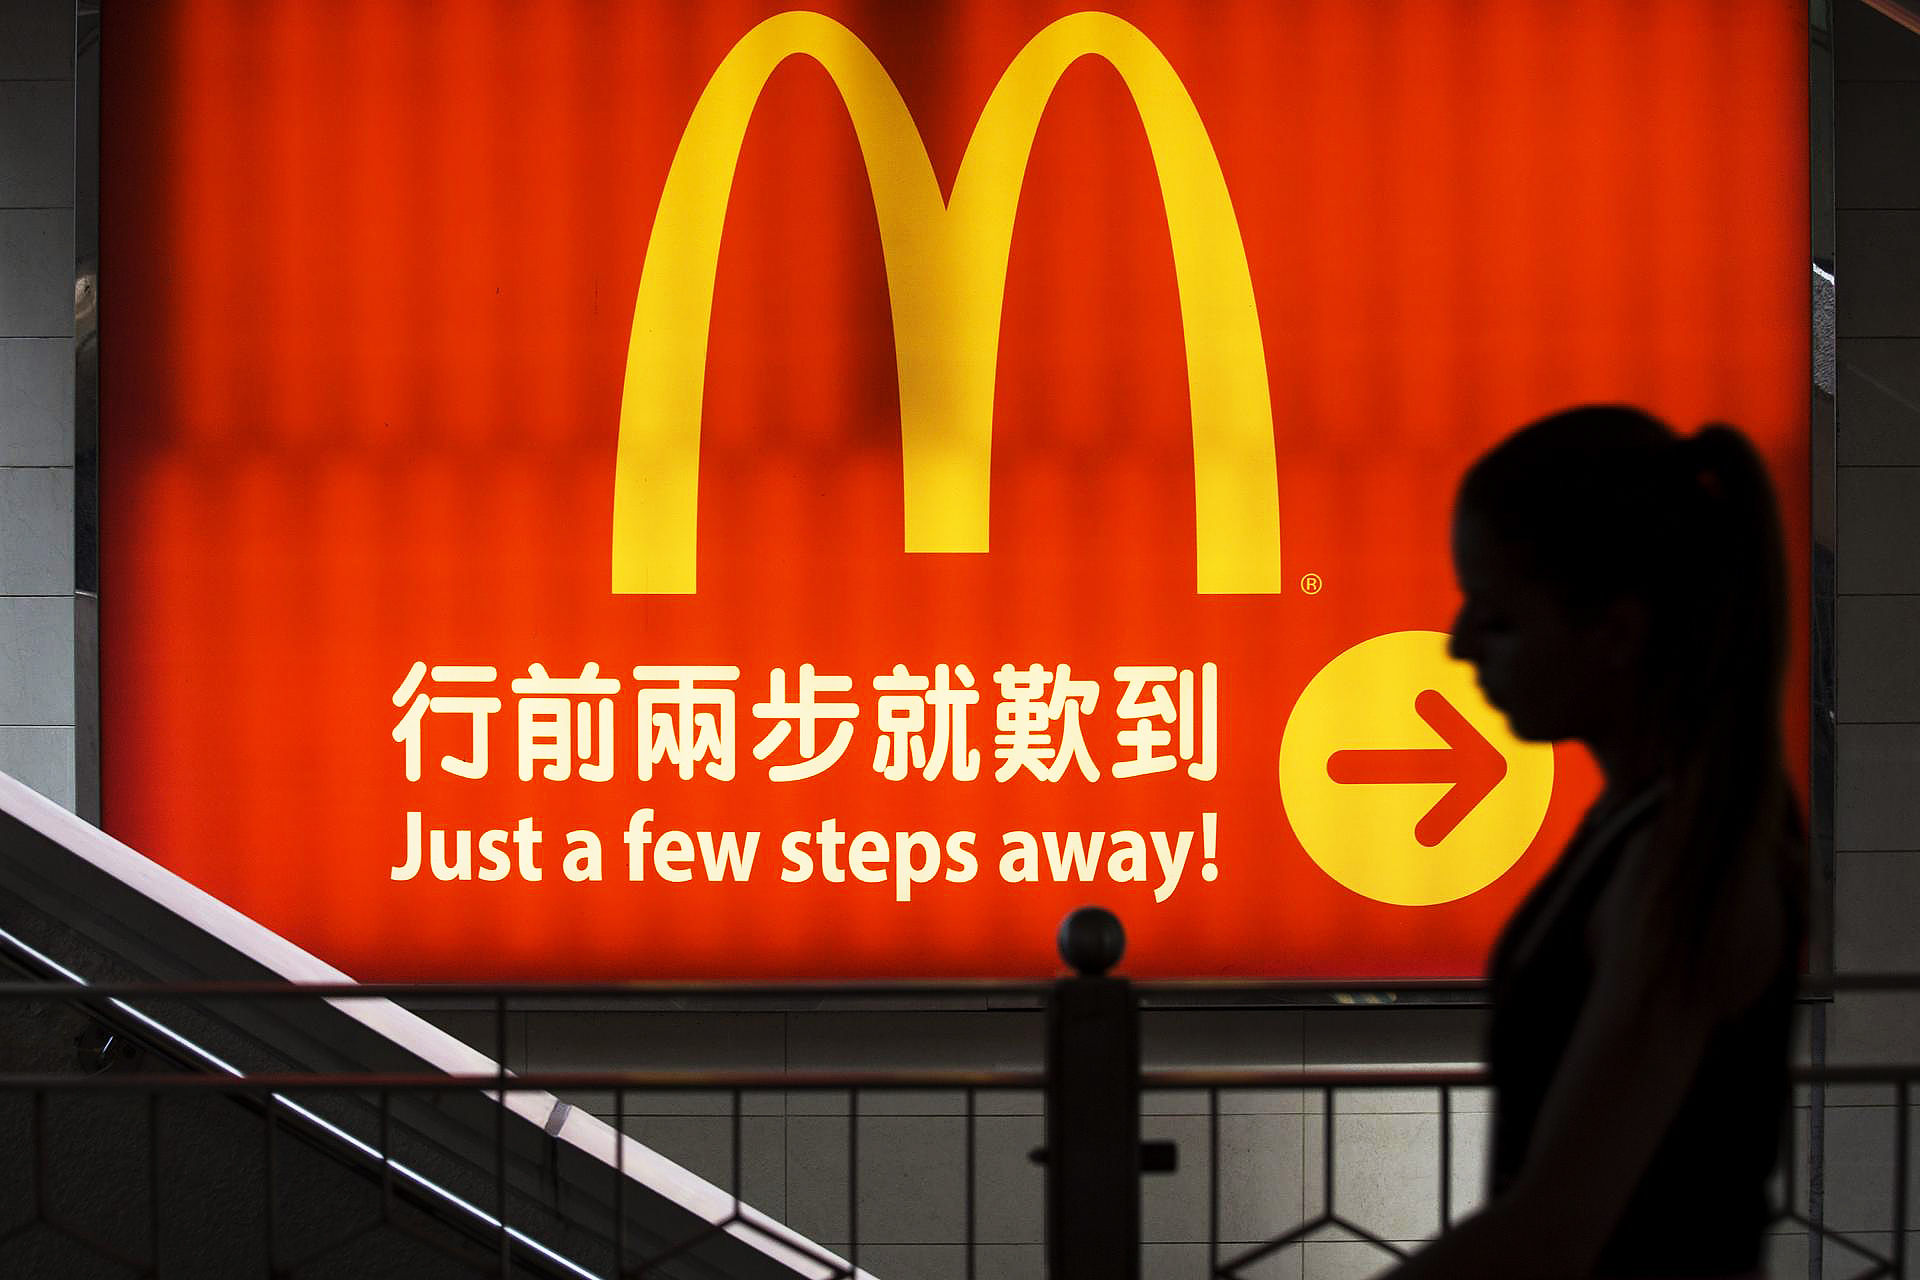 McDonald's is accused of "concealing events". Photo: Reuters